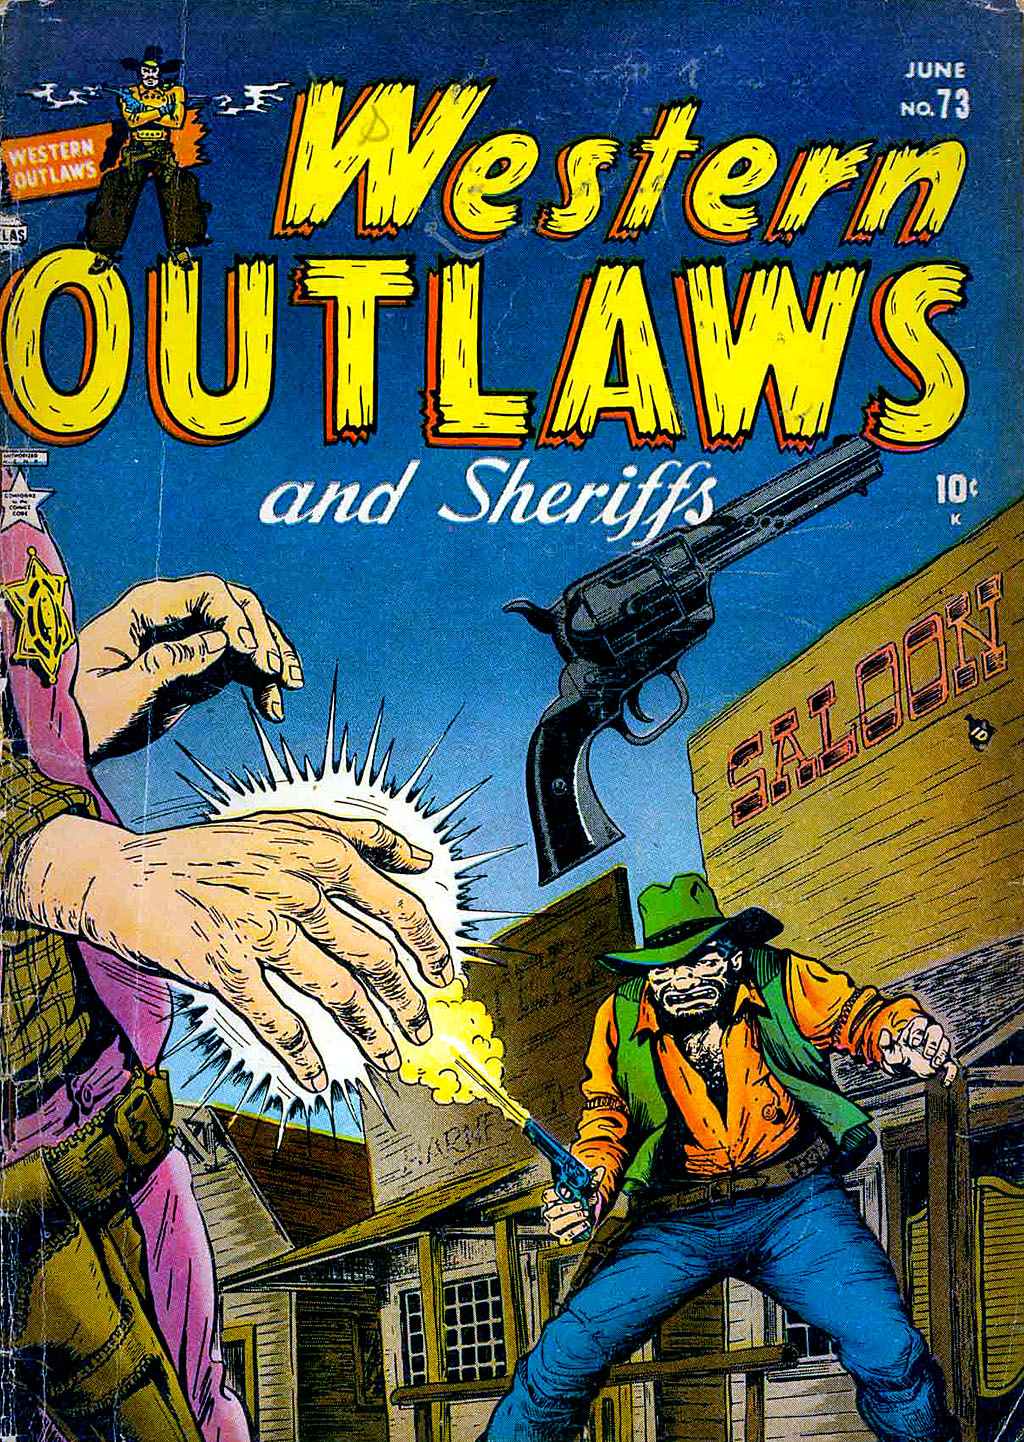 Western Outlaws and Sheriffs 73 Page 1